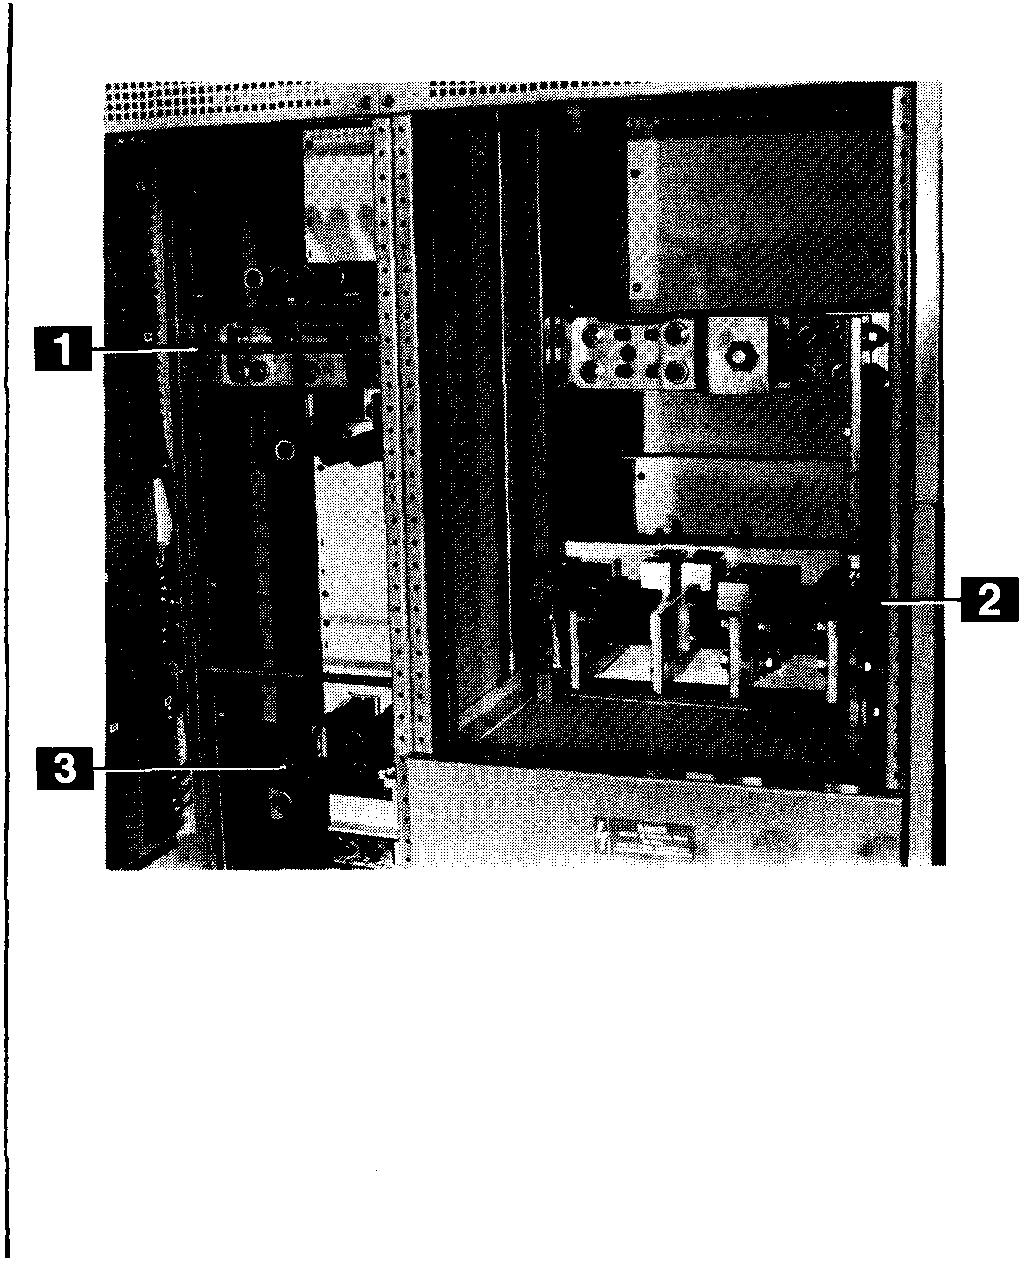 When specified, racks (1), Fig. 3-28, for the support of feeder cables are located in the cable compartment. The actual support of the cables is provided by lashing them to these racks.